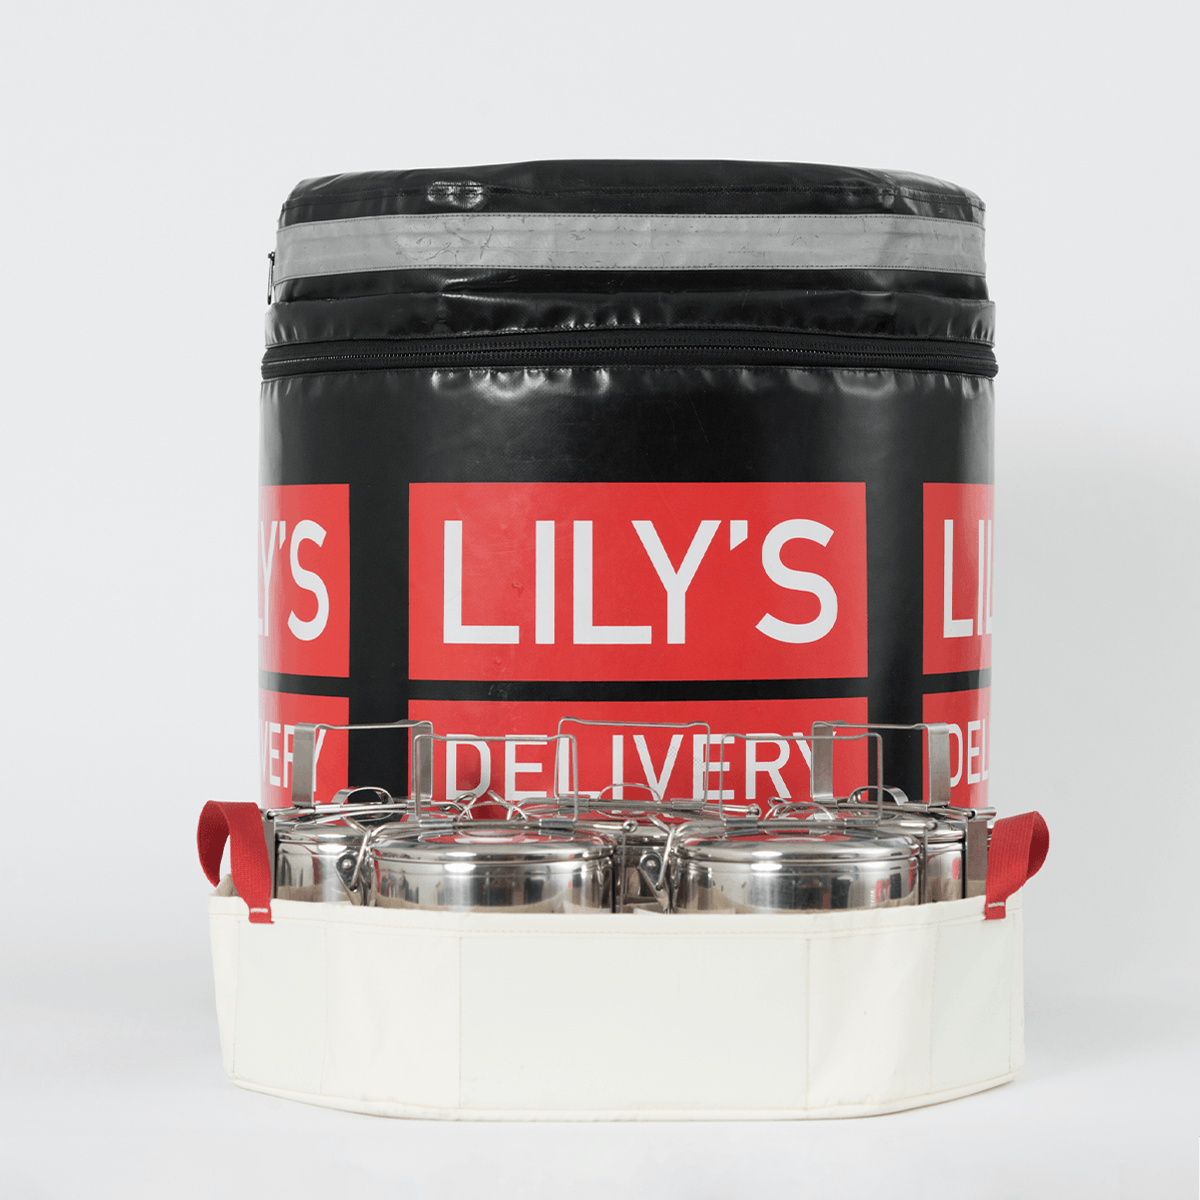 Industrial Design for LILY'S